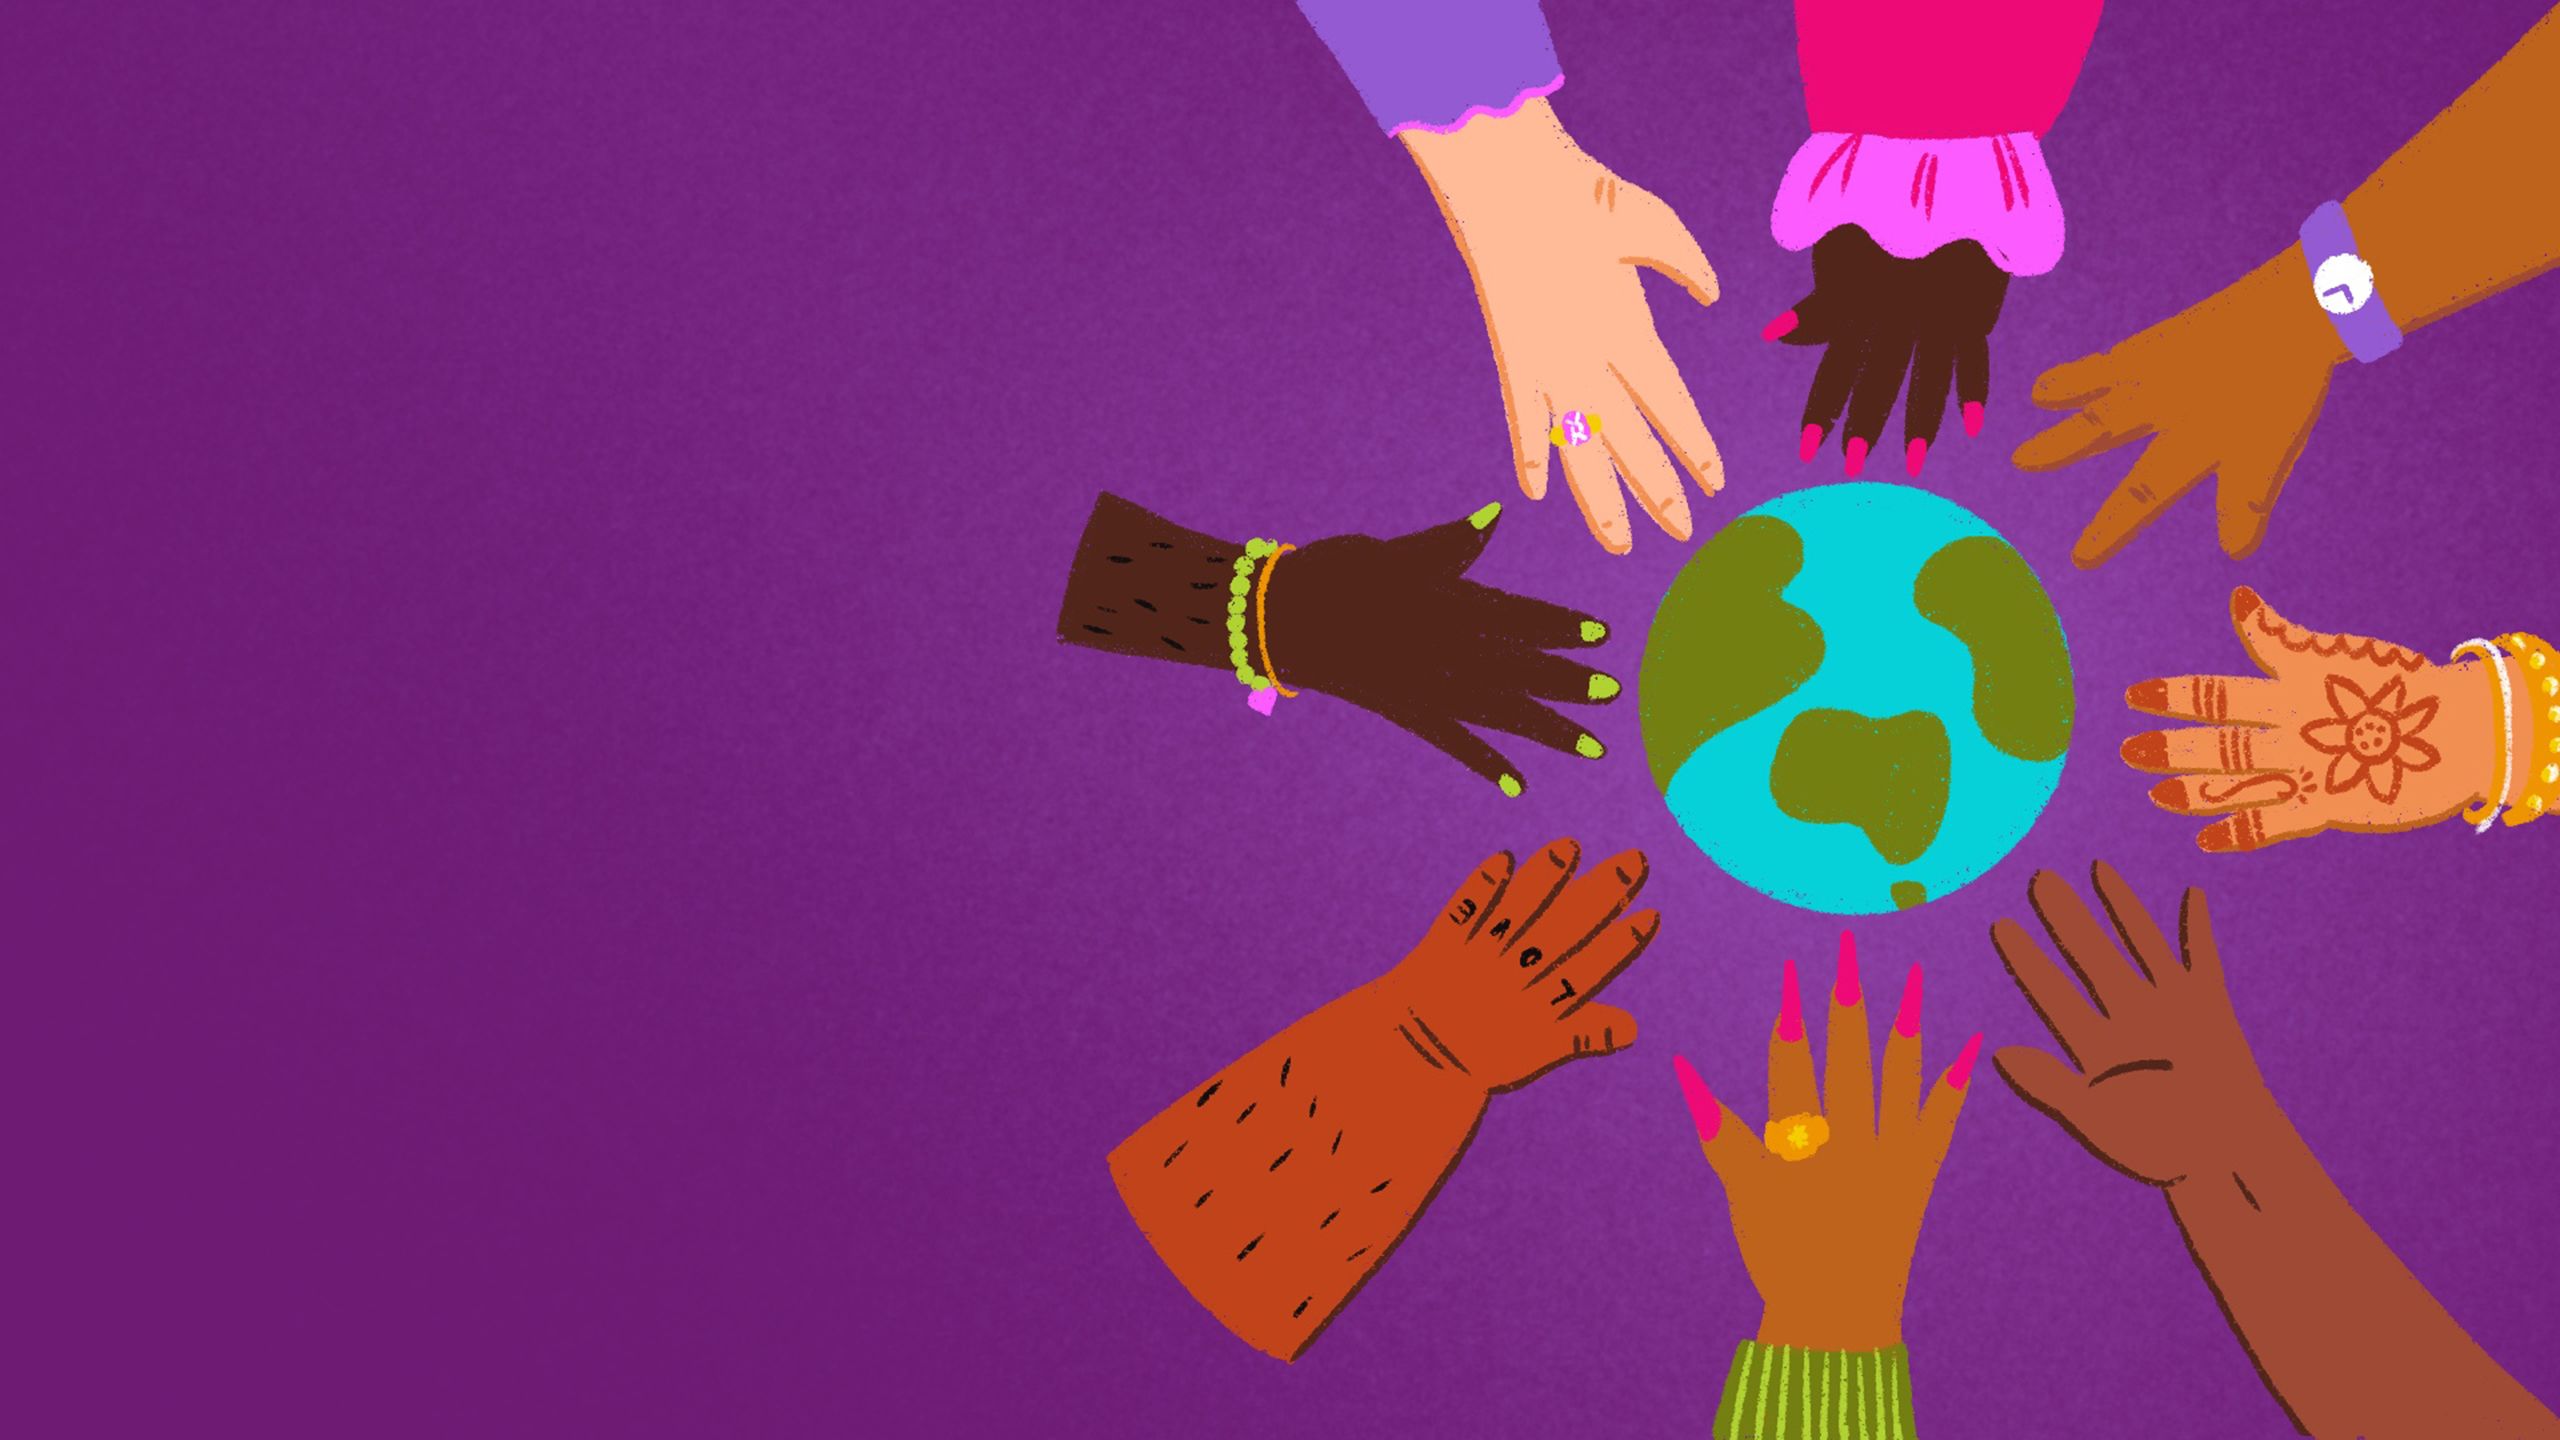 A pink, green, blue and purple illustration of different hands out flat, positioned around the globe. 